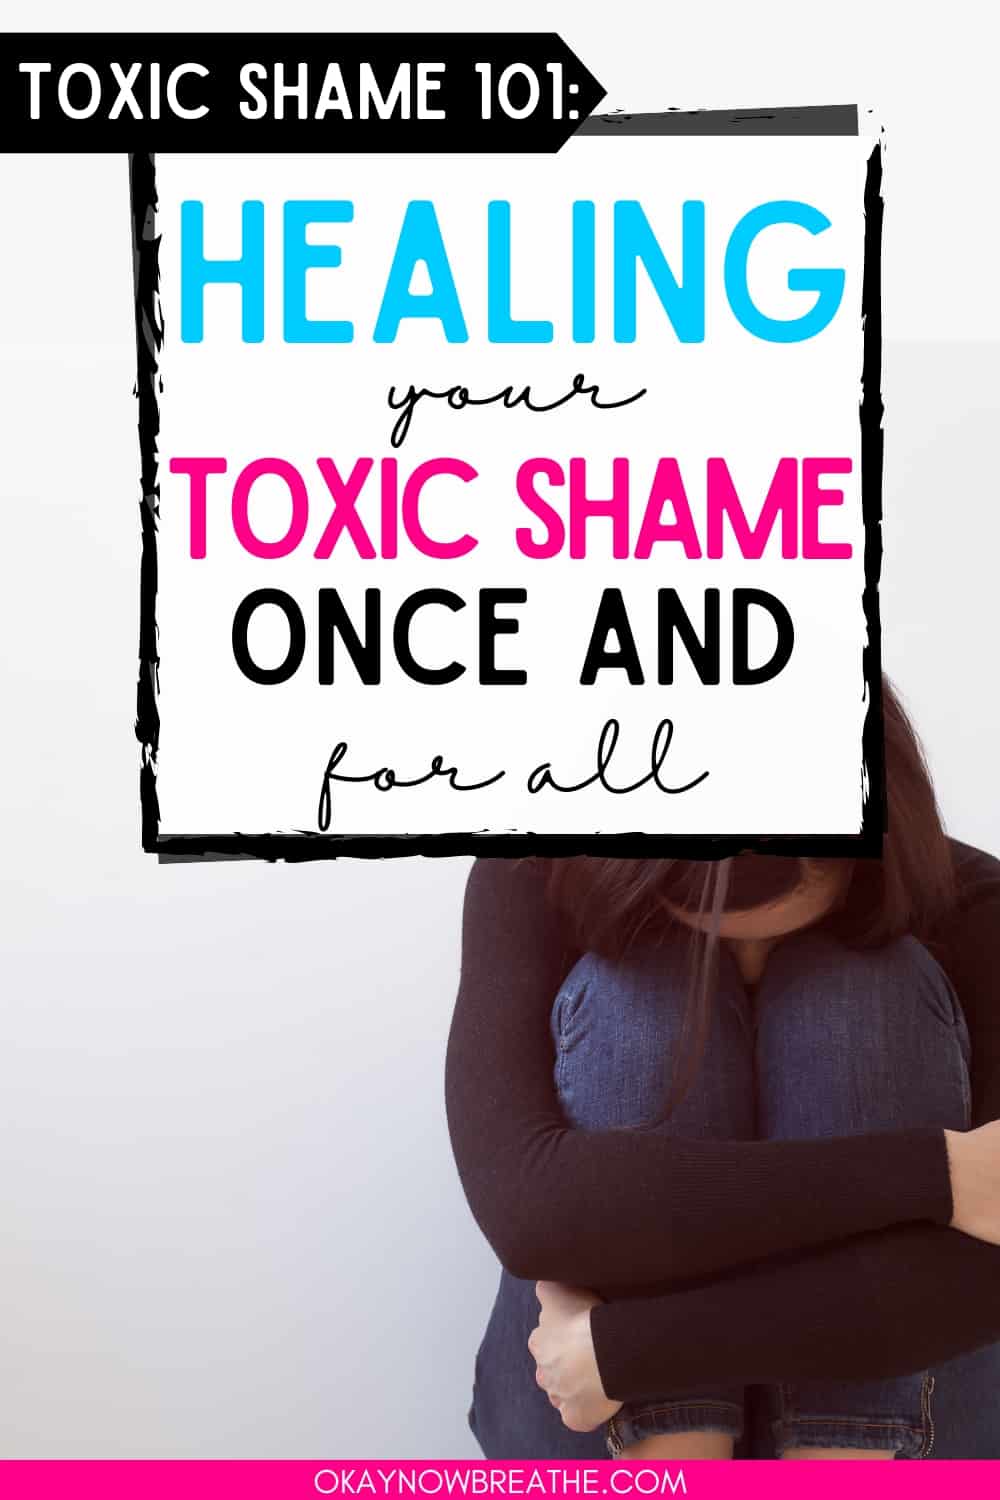 There is a woman in a seated fetal position. Text overlay says "toxic shame: 101 - healing your toxic shame once and for all - okaynowbreathe.com